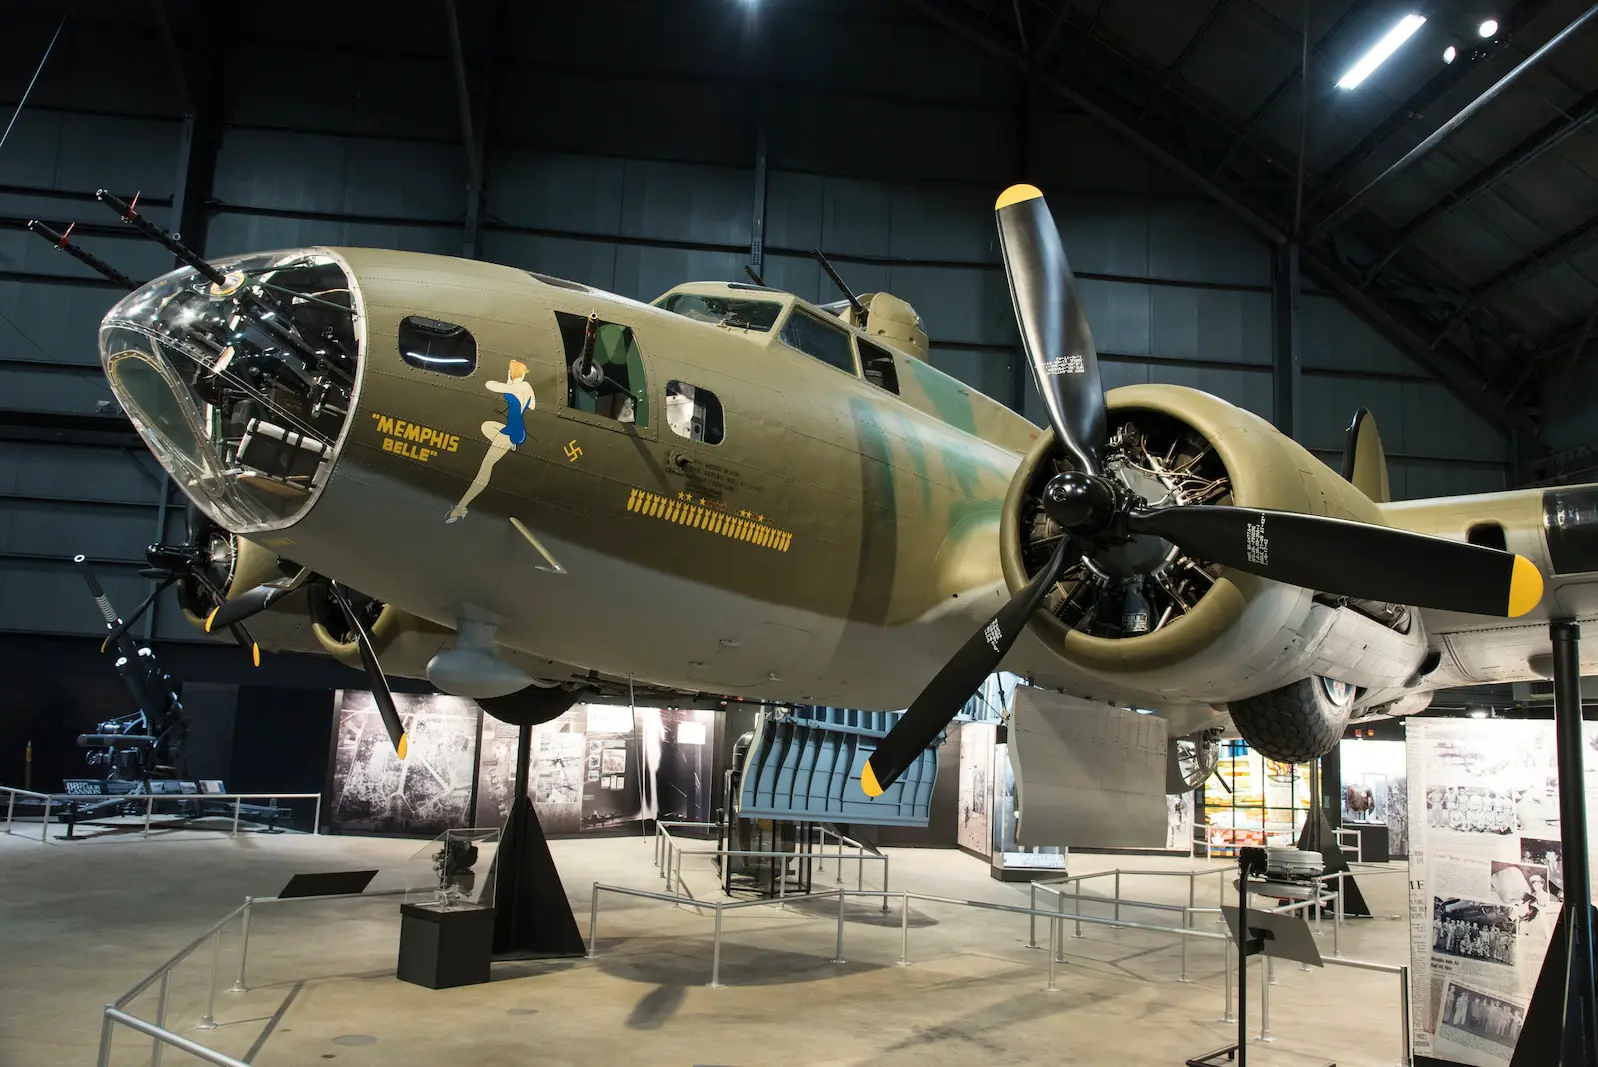 The National Museum of the U.S. Air Force